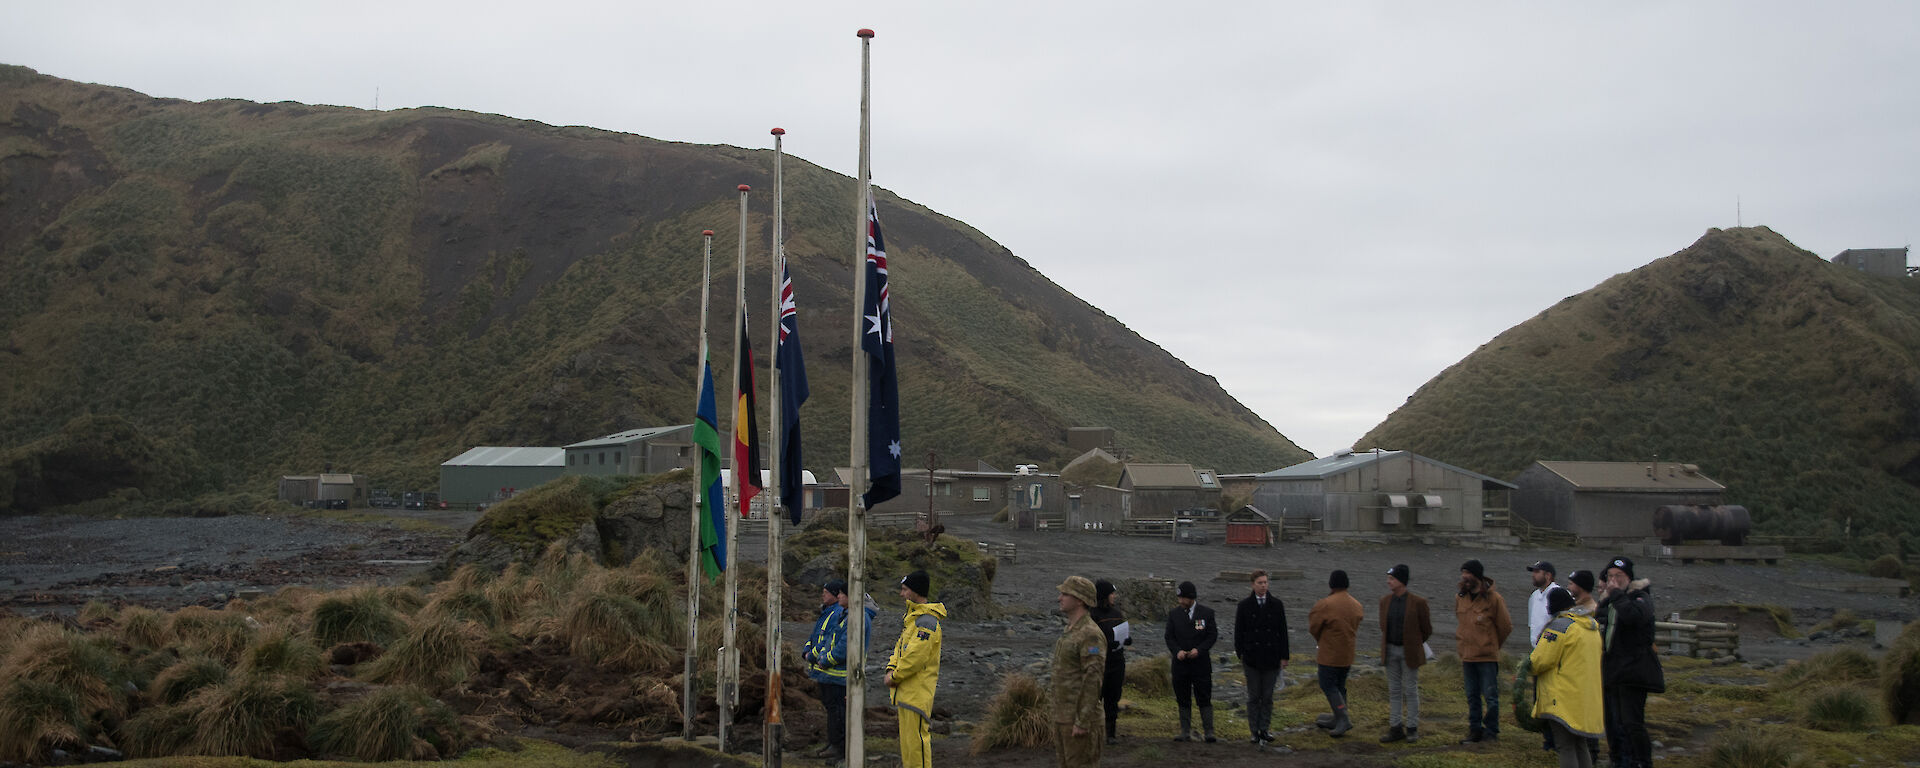 Group of expeditioners gathered around flag poles